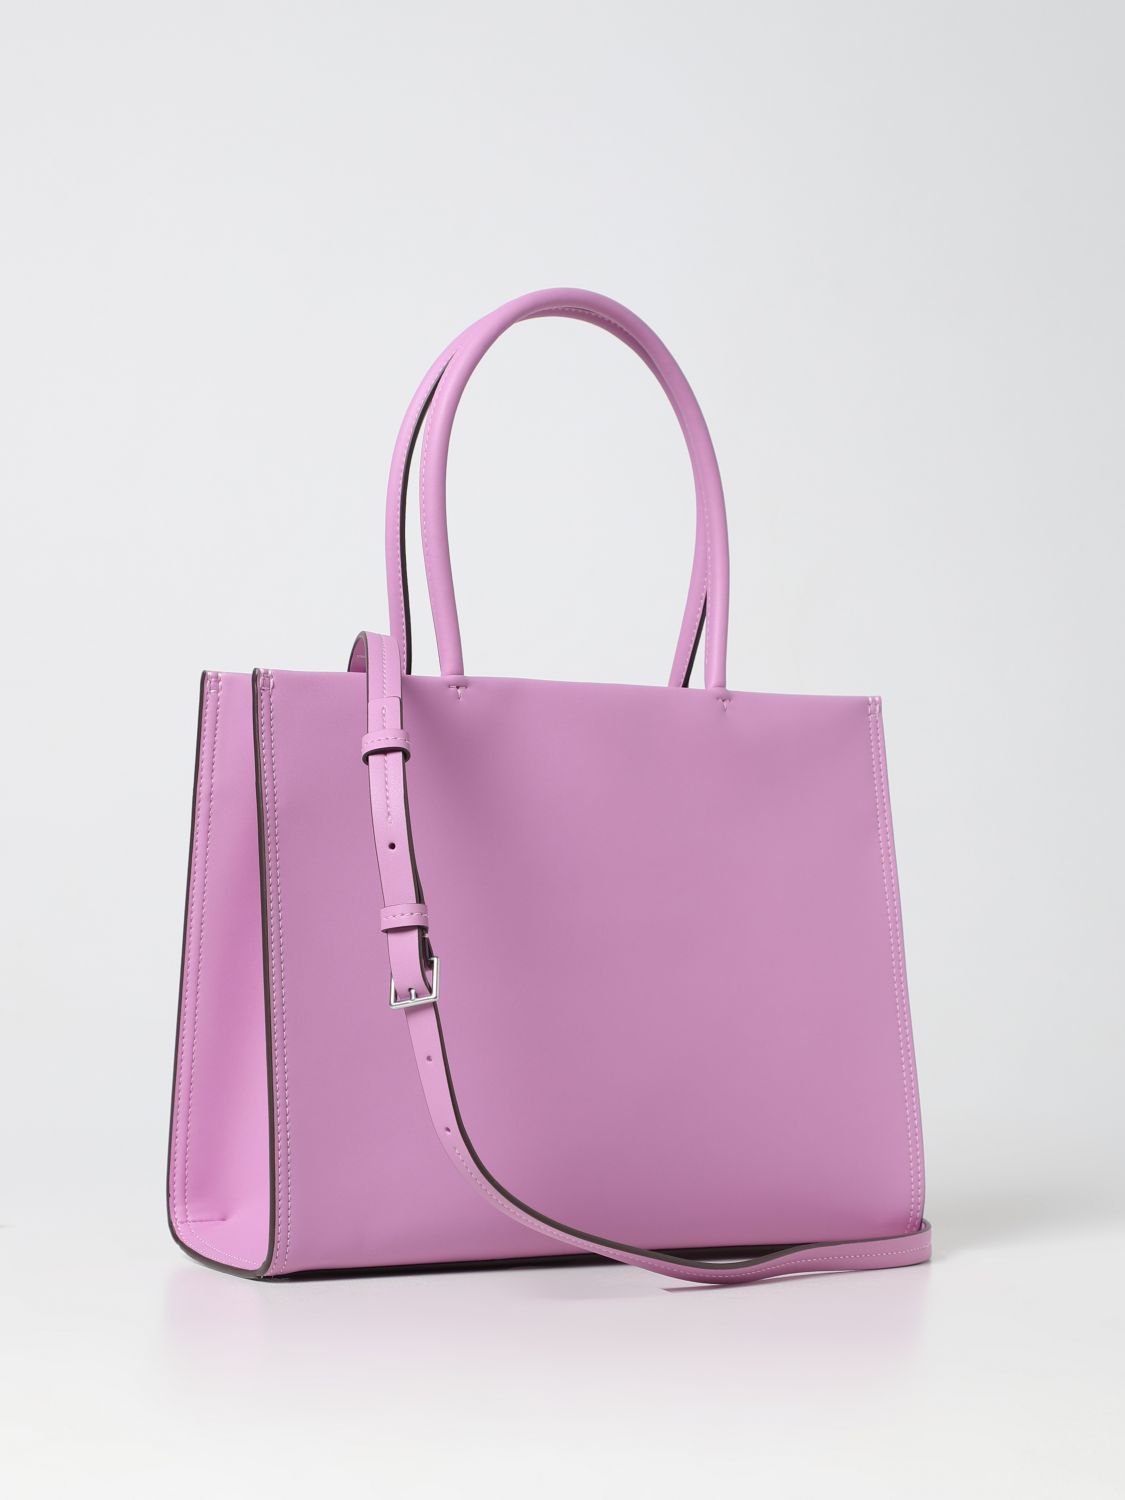 Tory Burch Outlet: Ella bag in synthetic leather - Lilac